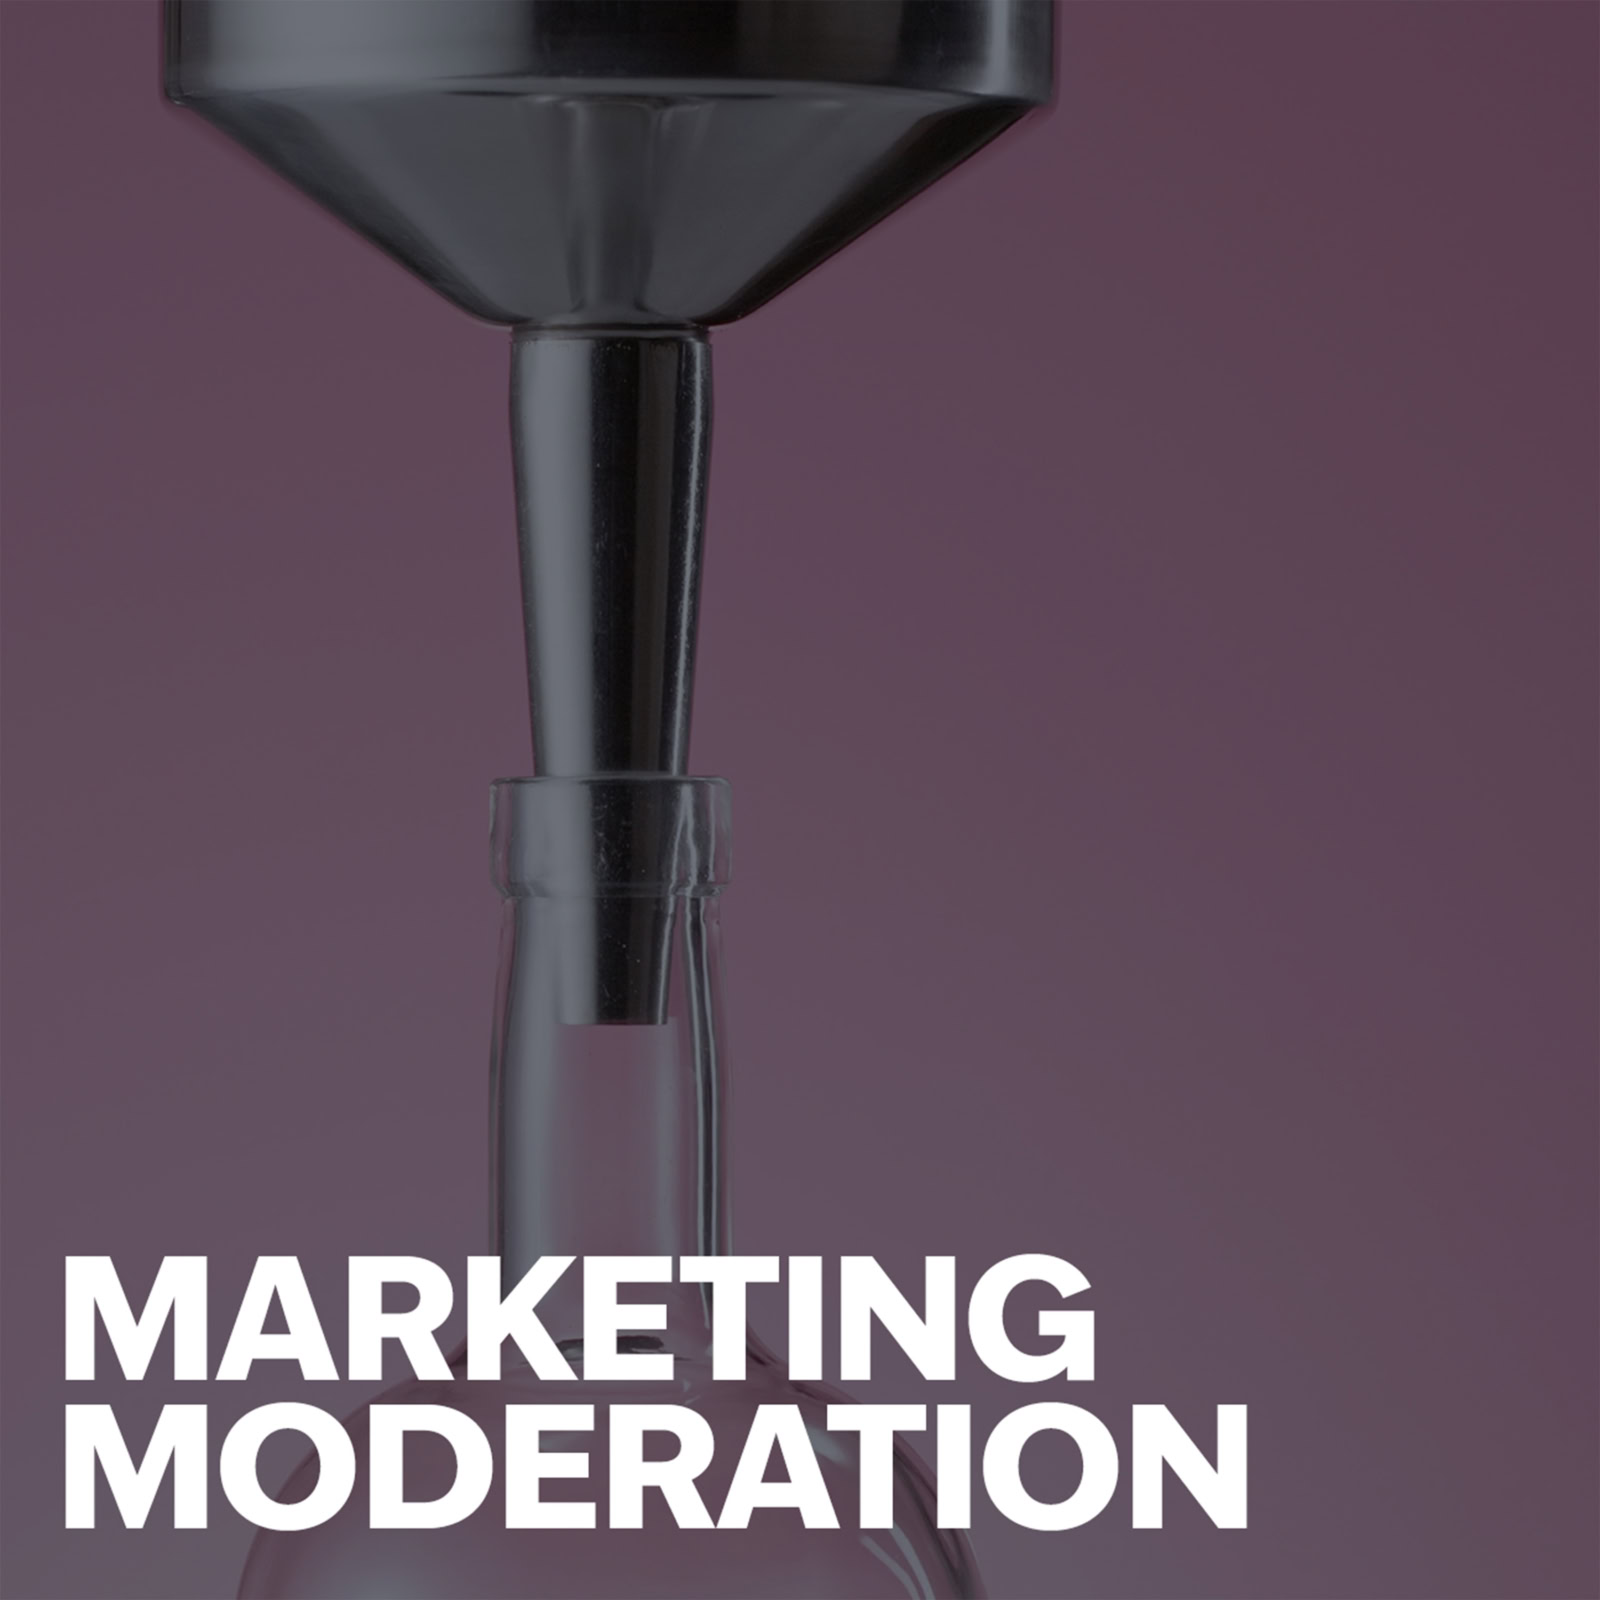 Podcast cover reads Marketing Moderation, text atop funnel pouring into spirits bottle